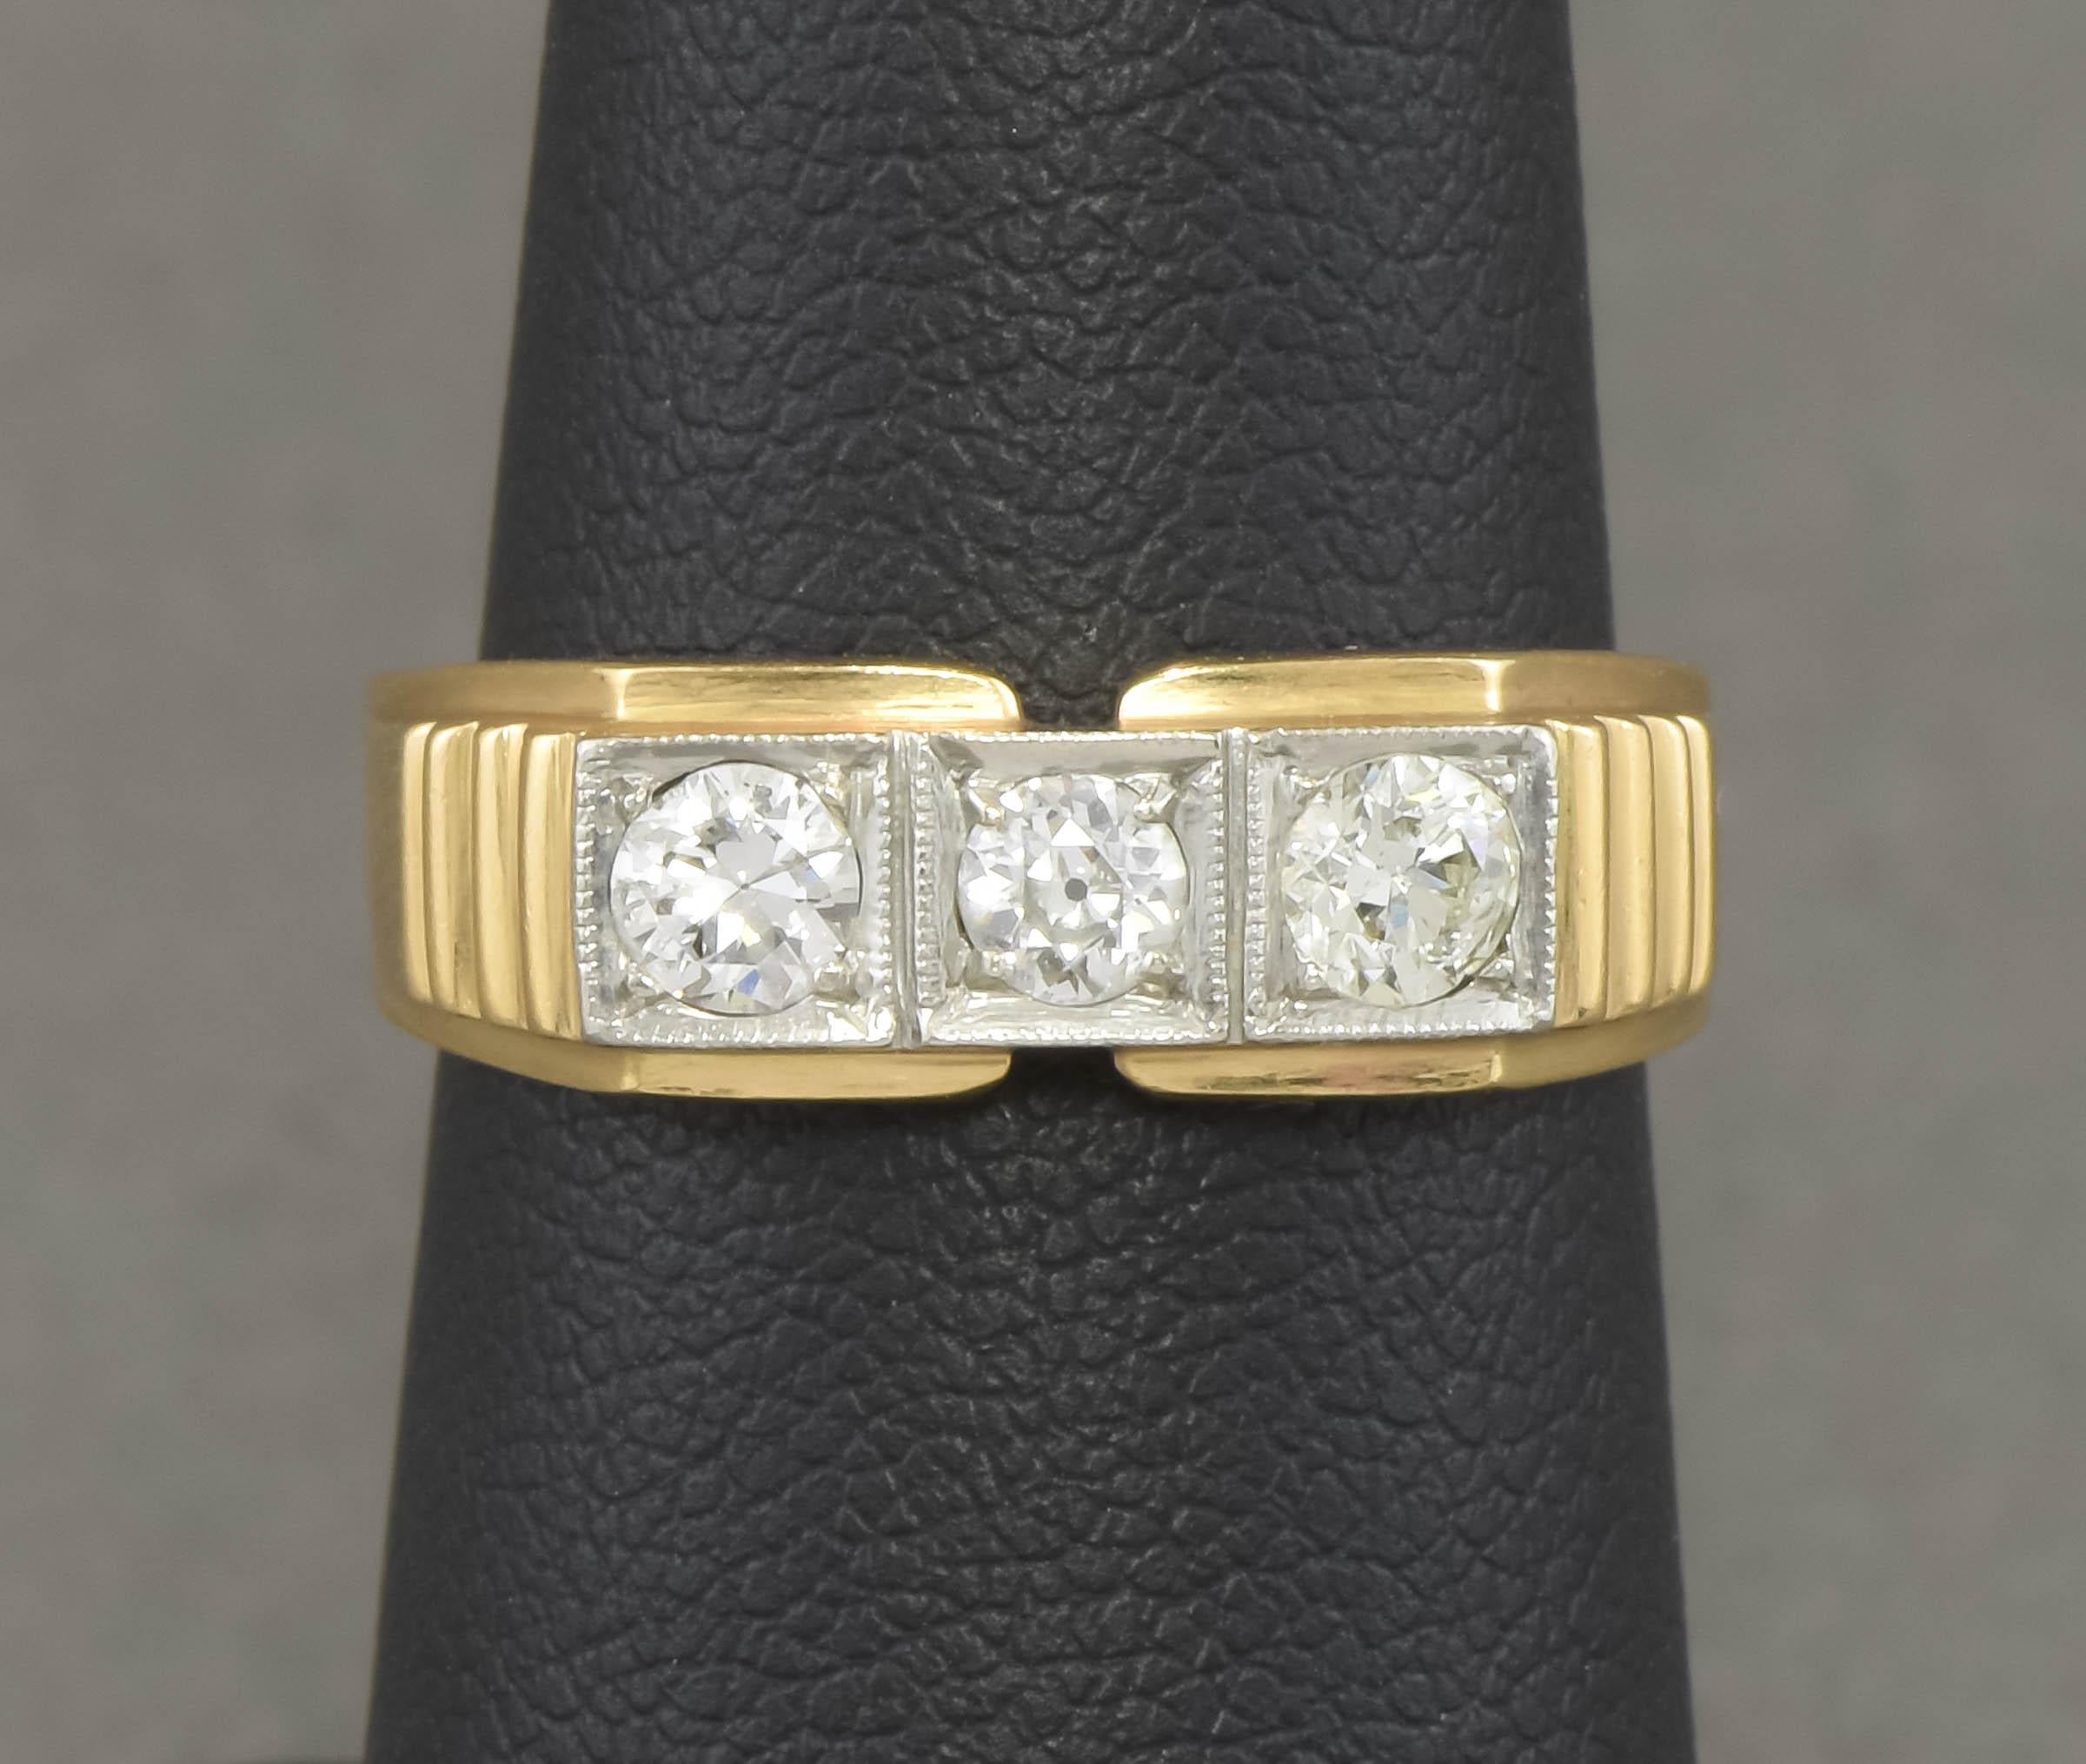 I'm pleased to offer this substantial and luxurious old cut diamond band in high karat gold.  Dating to the 1930's into the 1940's, it has great design elements in keeping with streamlined Art Deco style, but also a nod to the retro period.  I'm